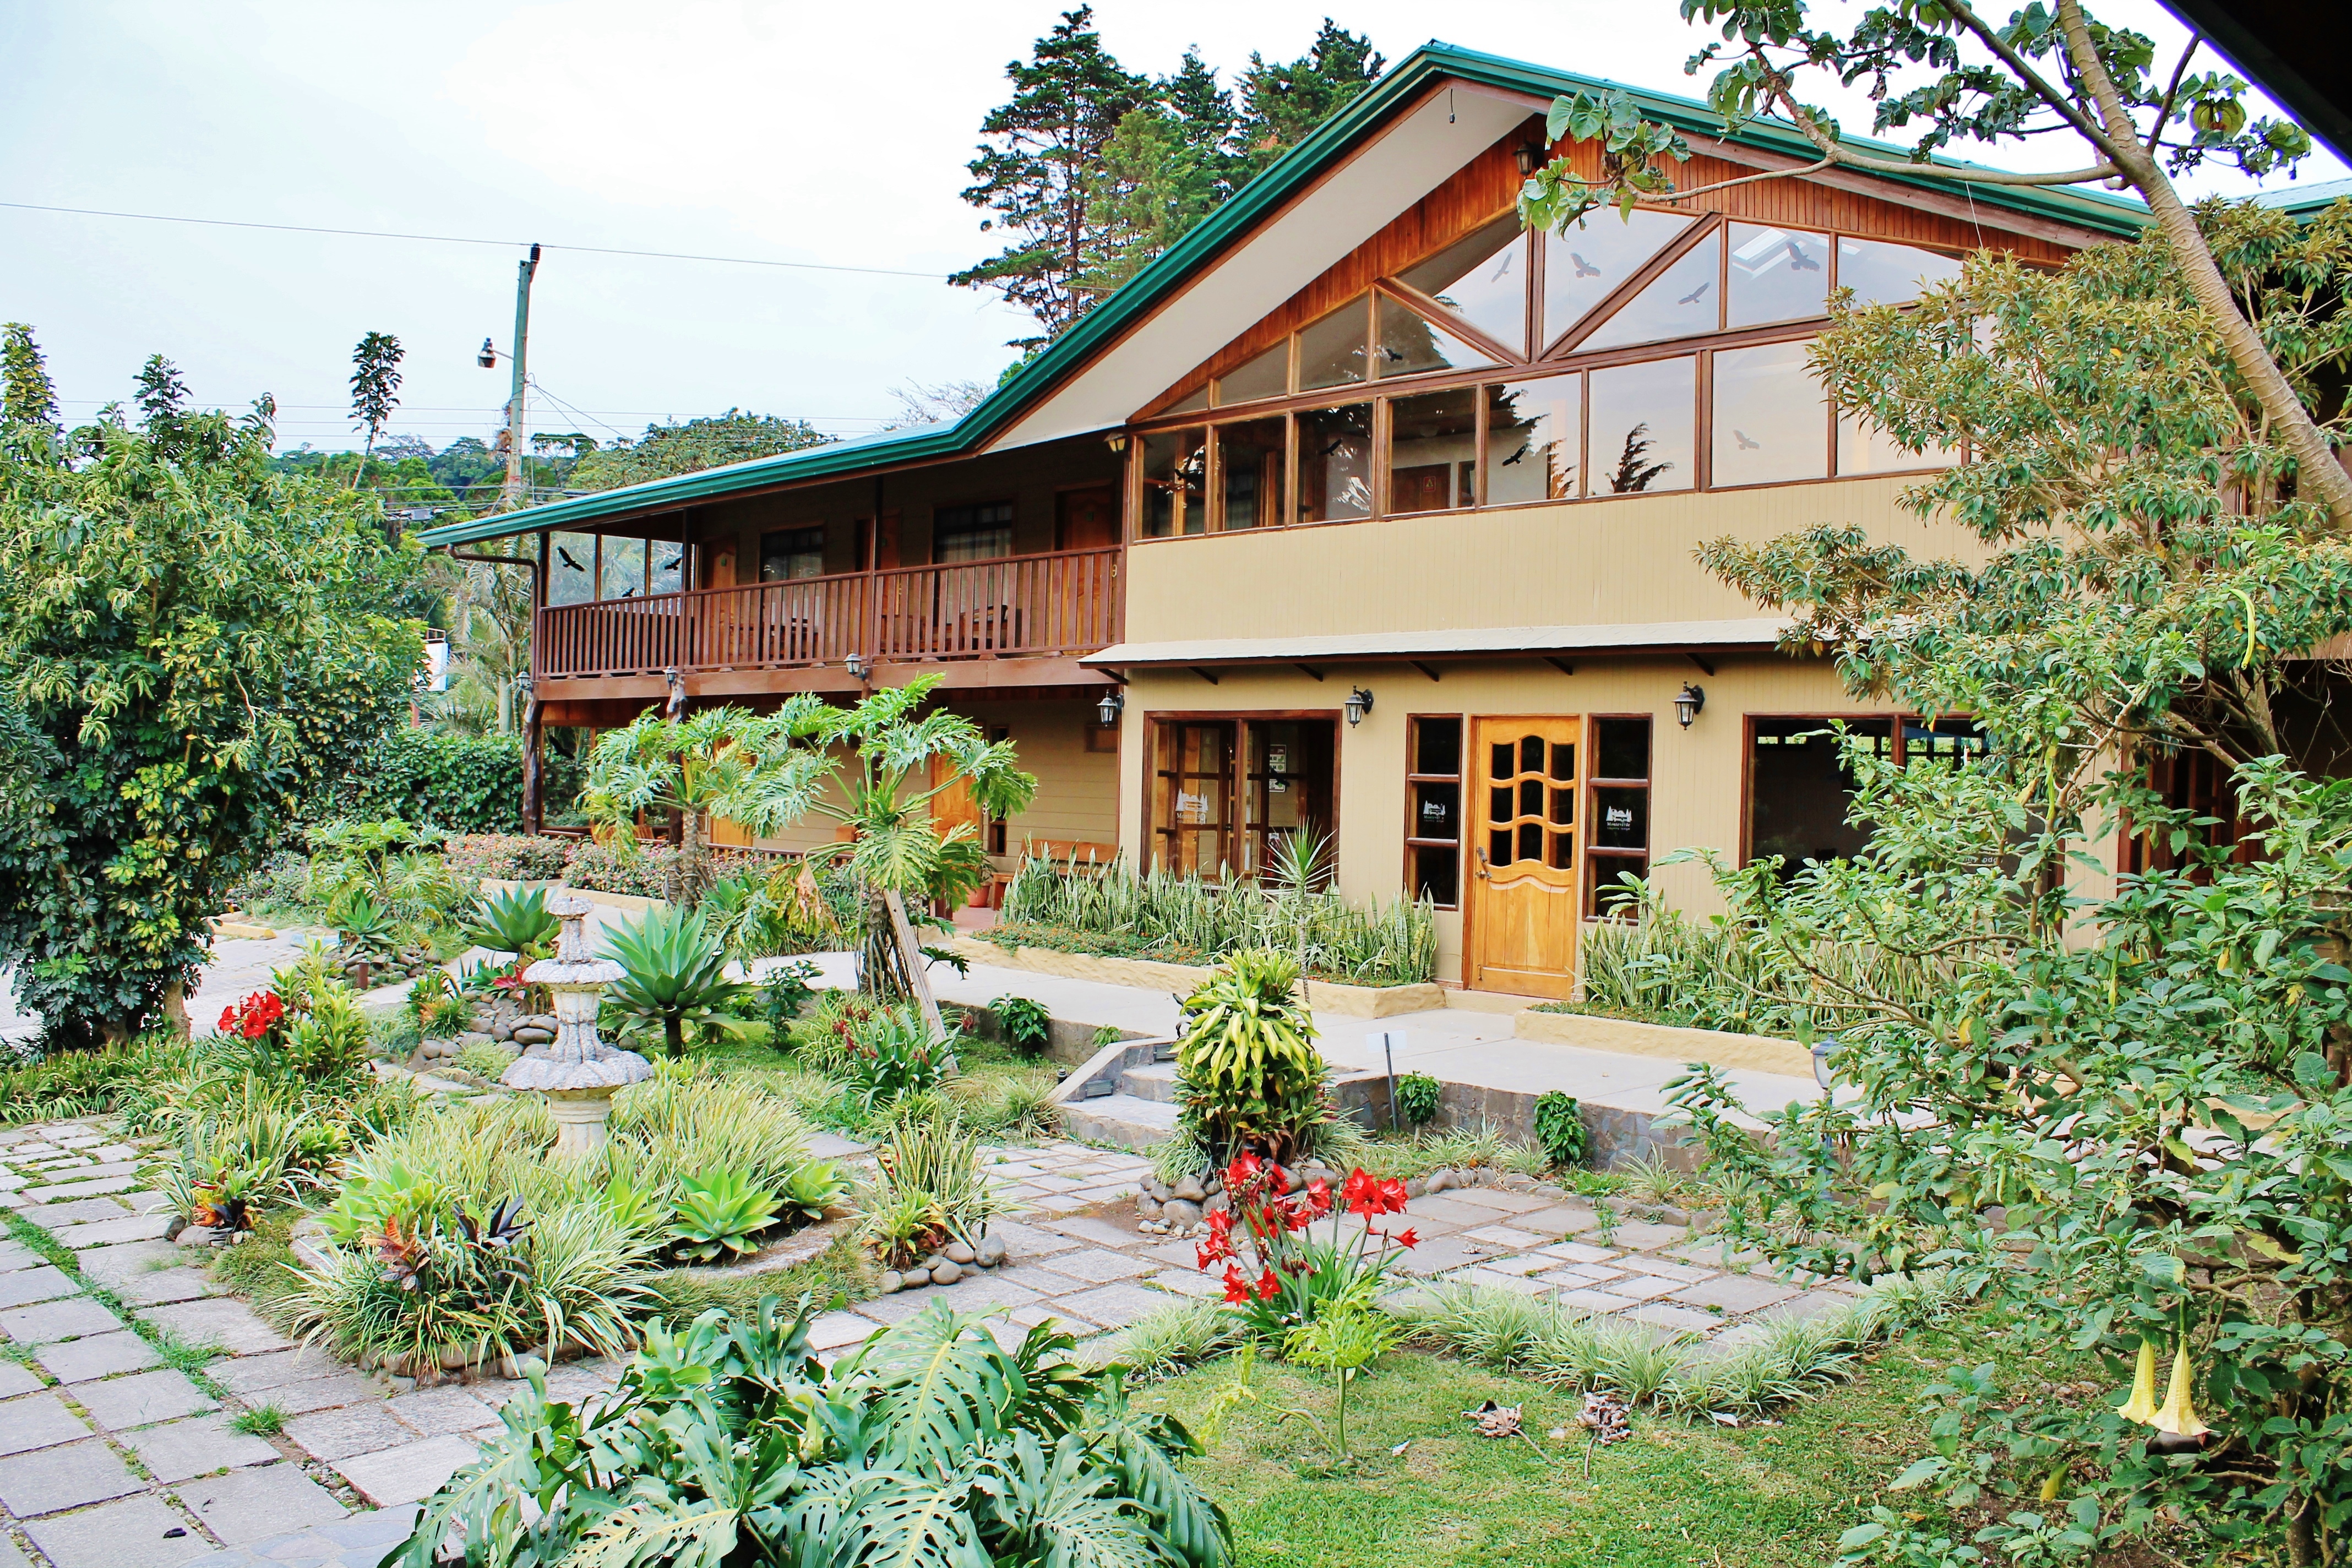 Monteverde Hotel Recommendation: Monteverde Country Lodge; A Quiet And Rustic Lodge That Captures The Feel Of Monteverde